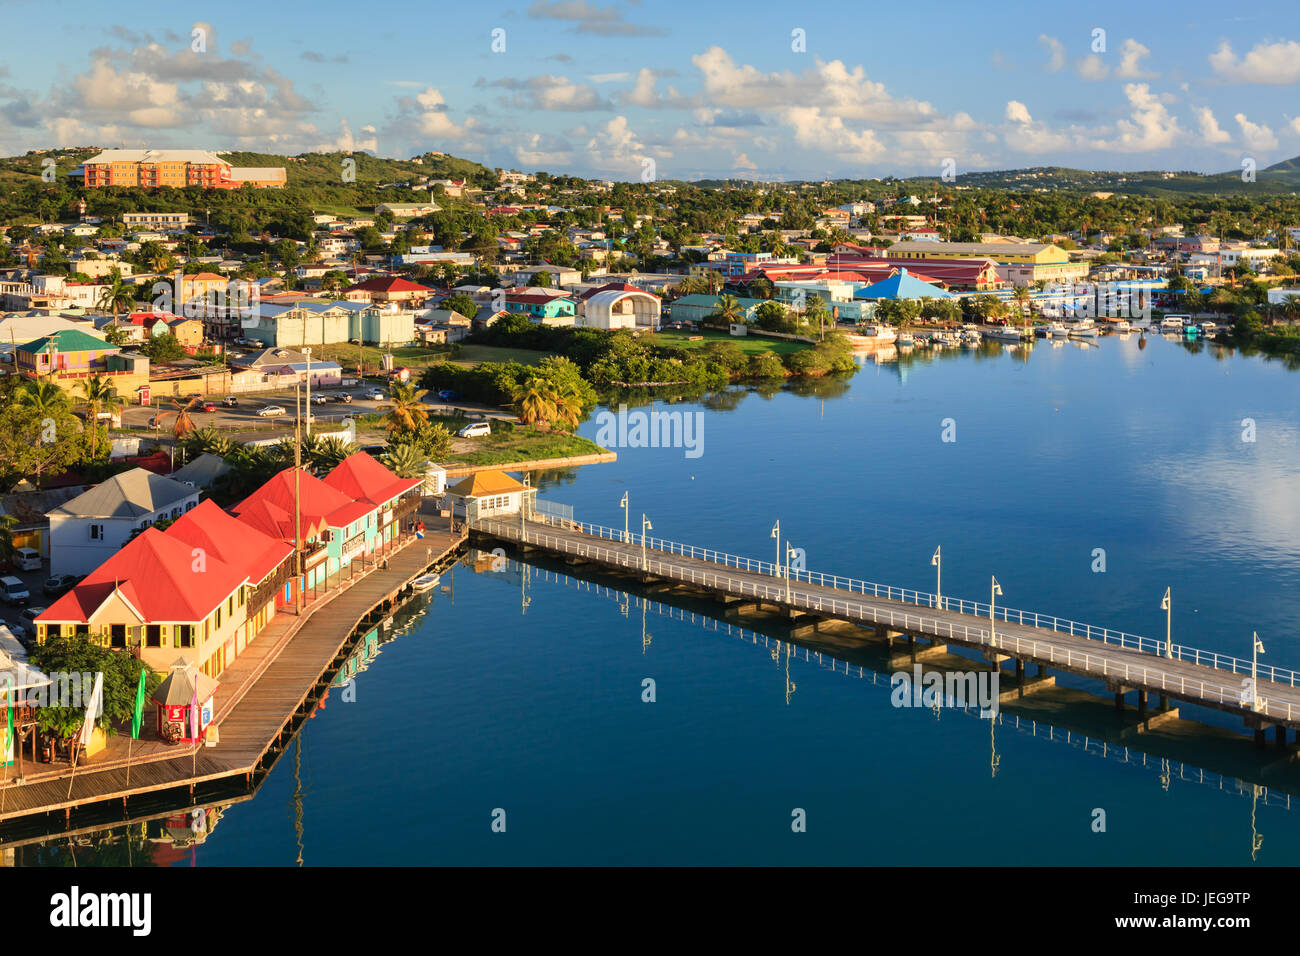 St Johns waterfront.  St Johns is the capital of the island of Antigua, one of the Leeward Islands in the West Indies. Stock Photo